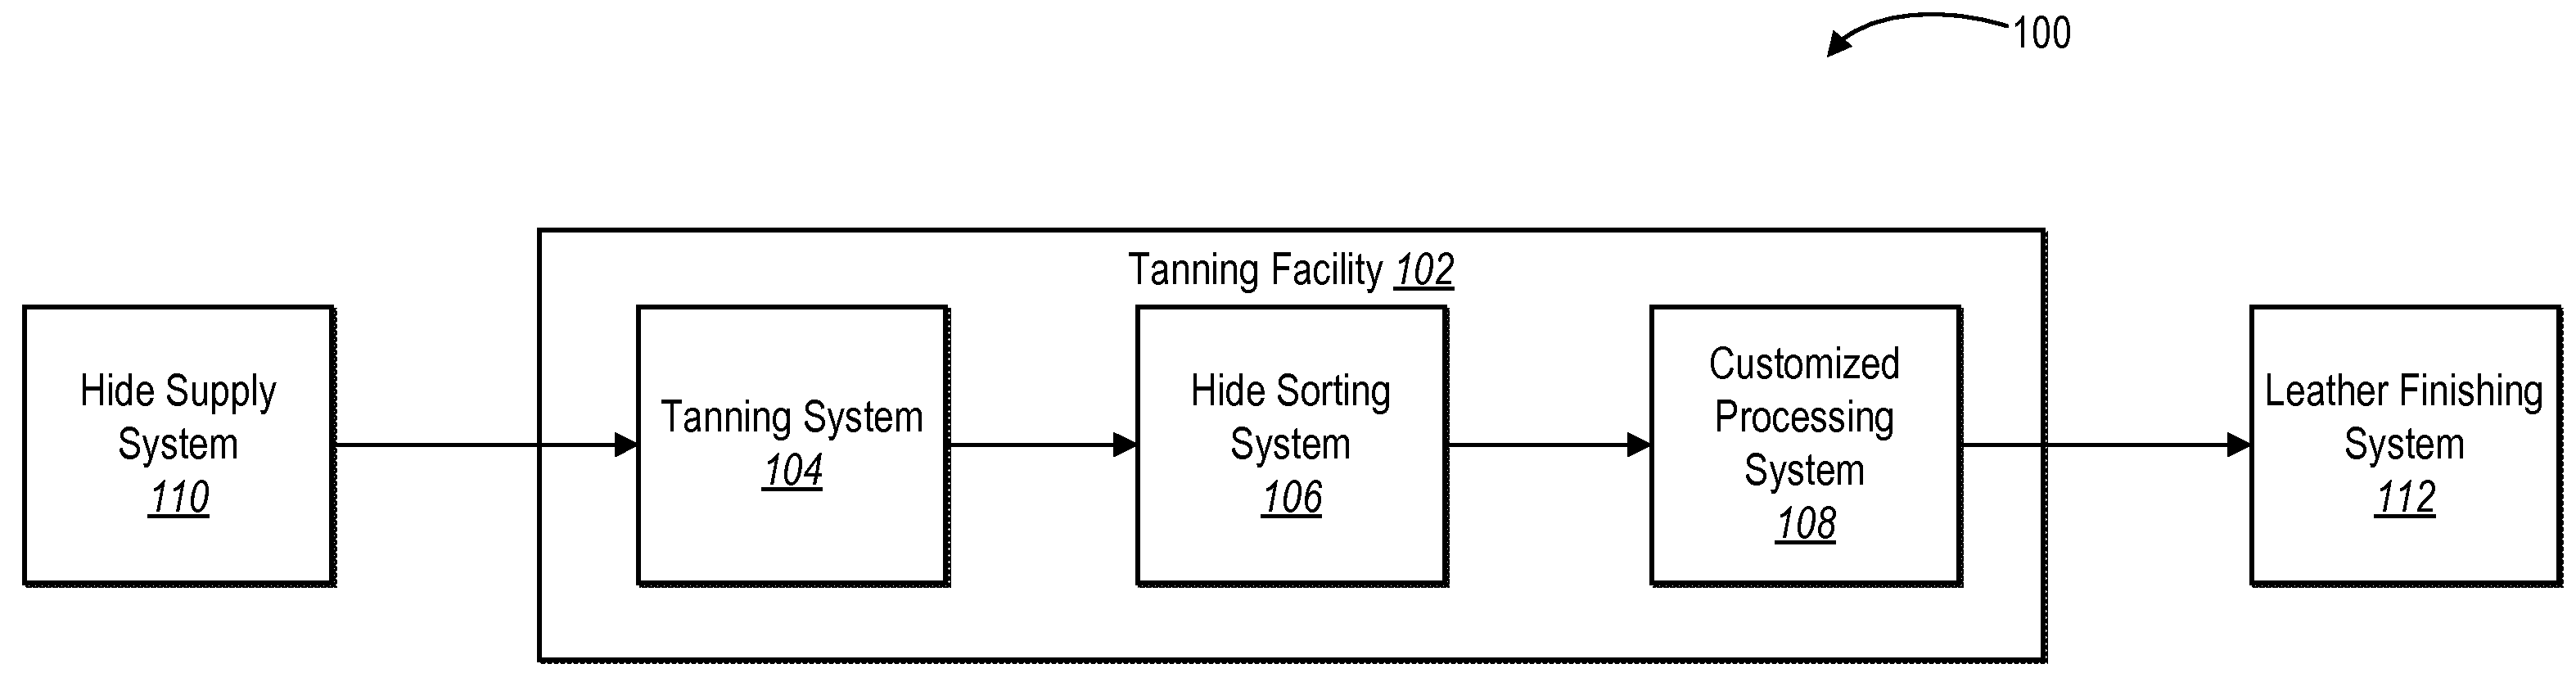 Hide sorting systems and methods